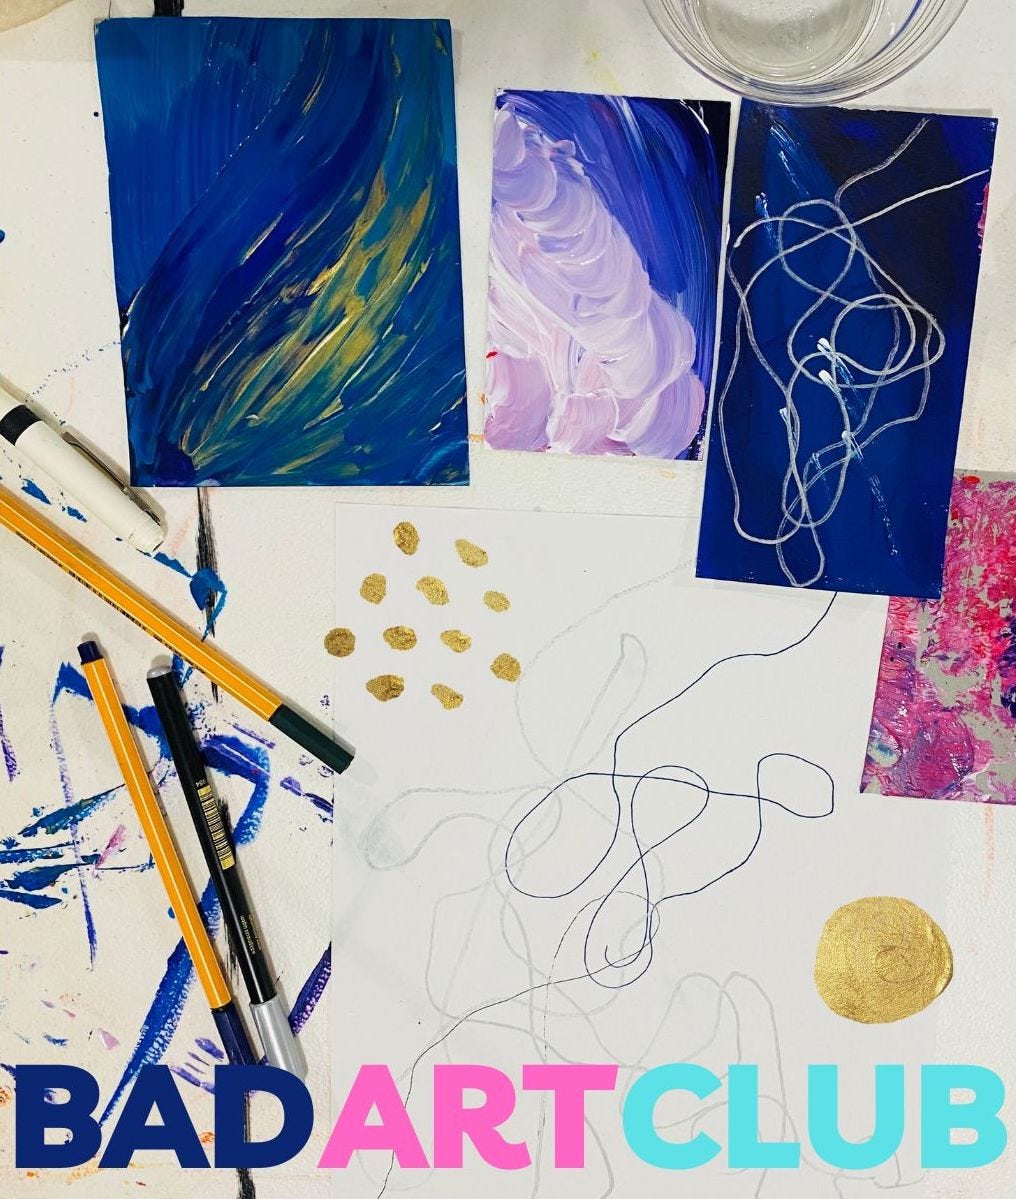 Lots of art materials, squiggles, gold paint, and a few samples of work from Bad Art Club, with "Bad Art Club" written in navy, pink, and turquoise at the bottom in stylized letters.